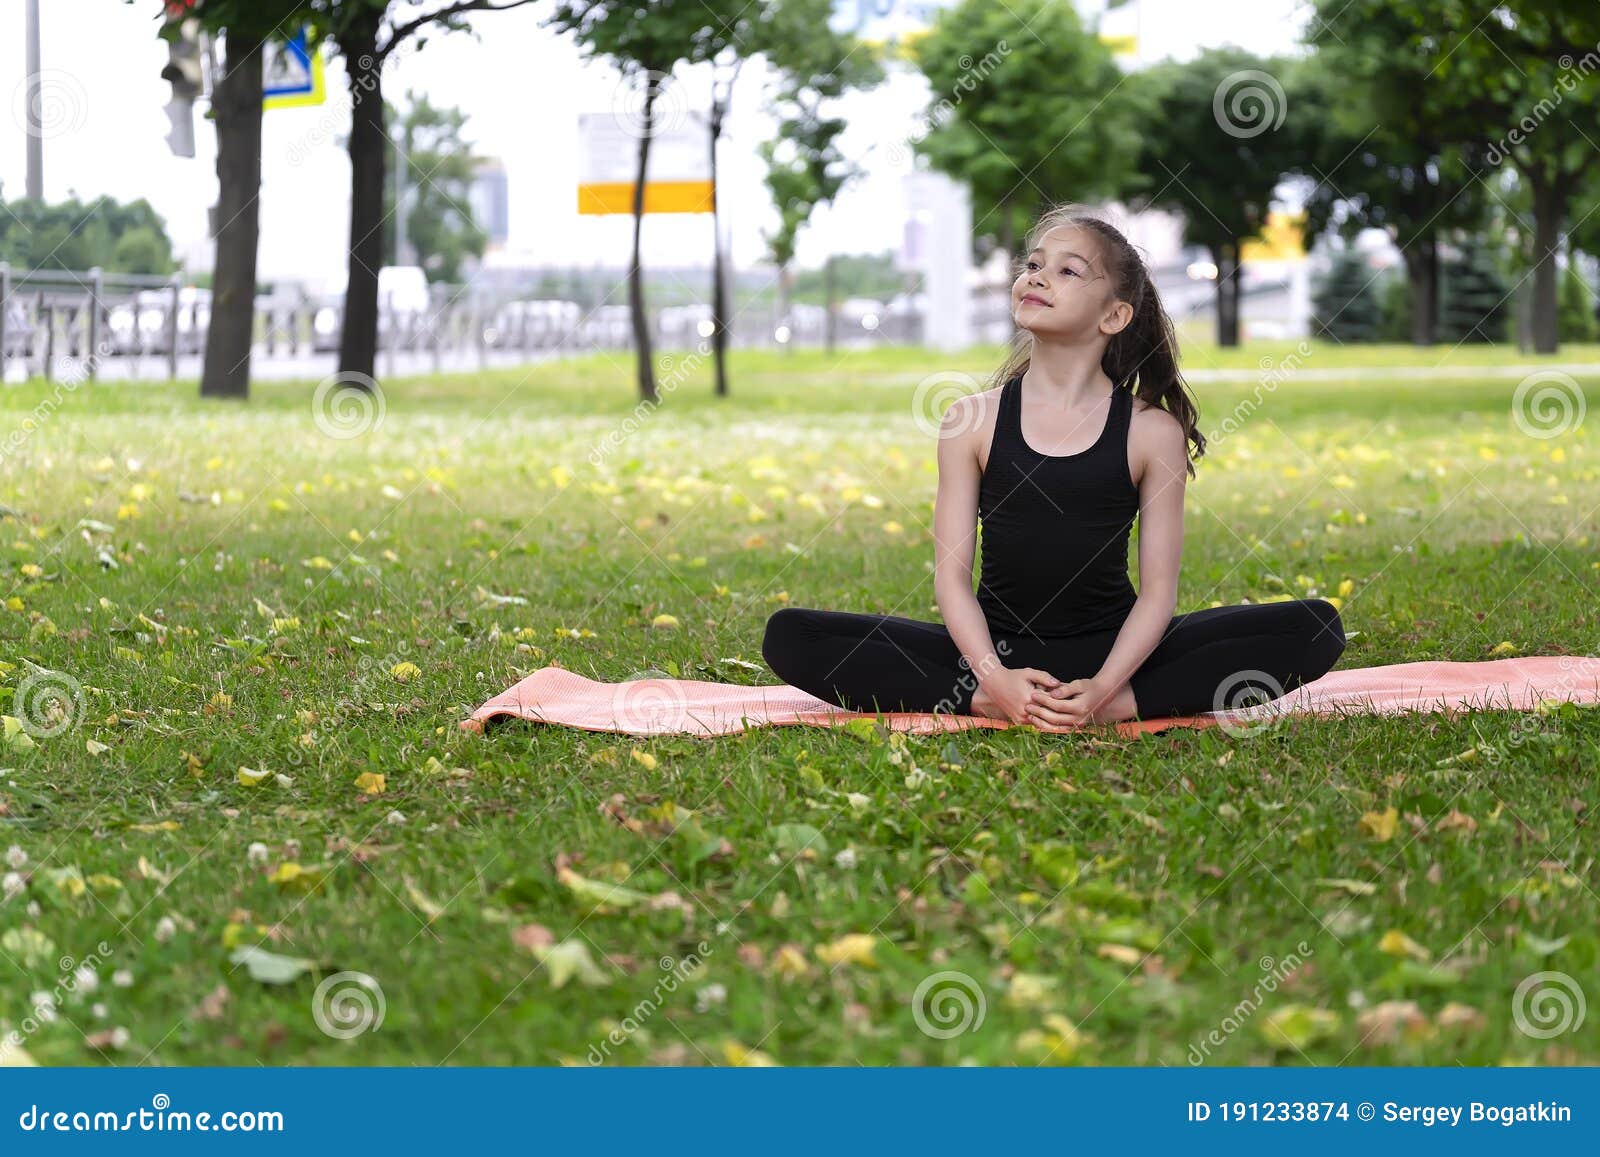 Gymnast Schoolgirl Warming Up in a Grass Park before Performing Complex ...